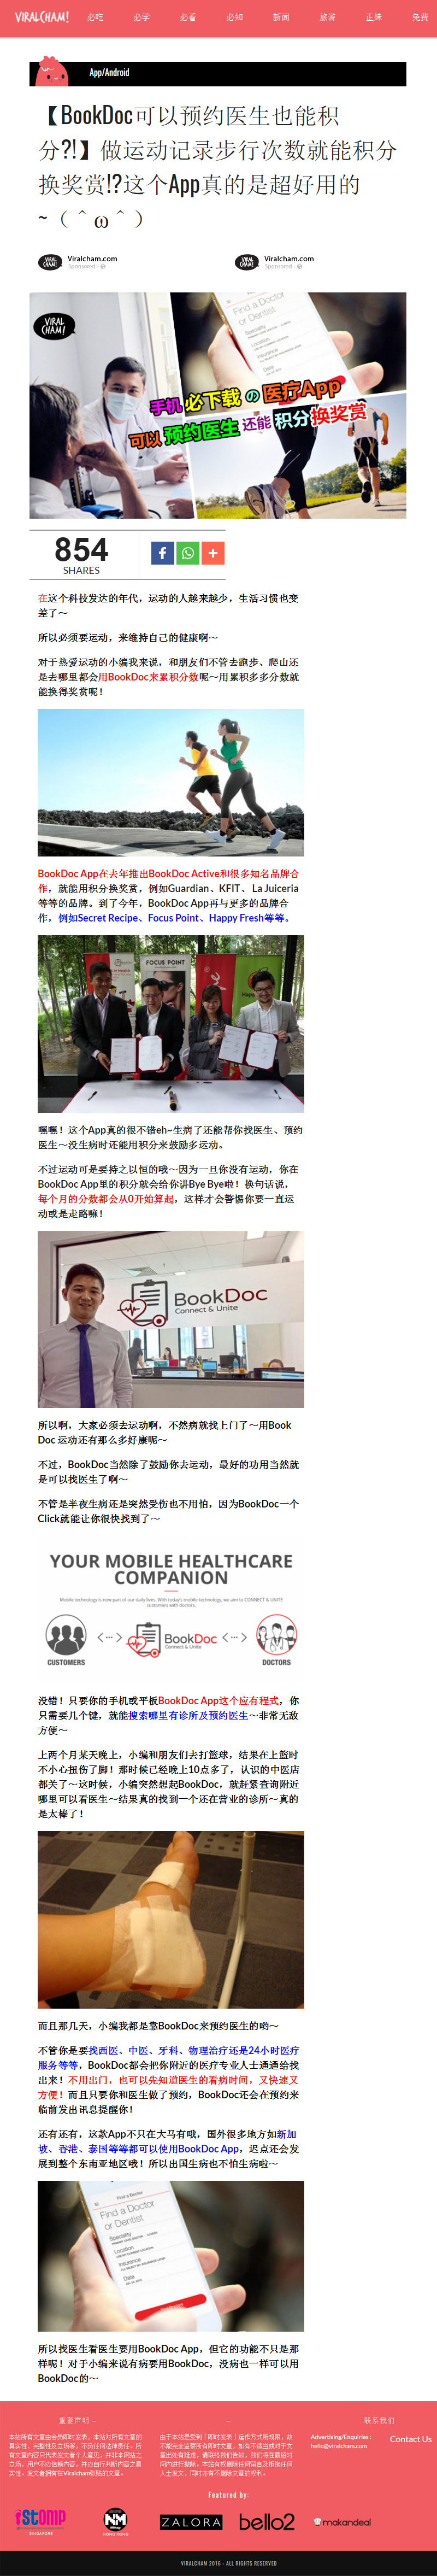 BookDoc featured on Viral Cham